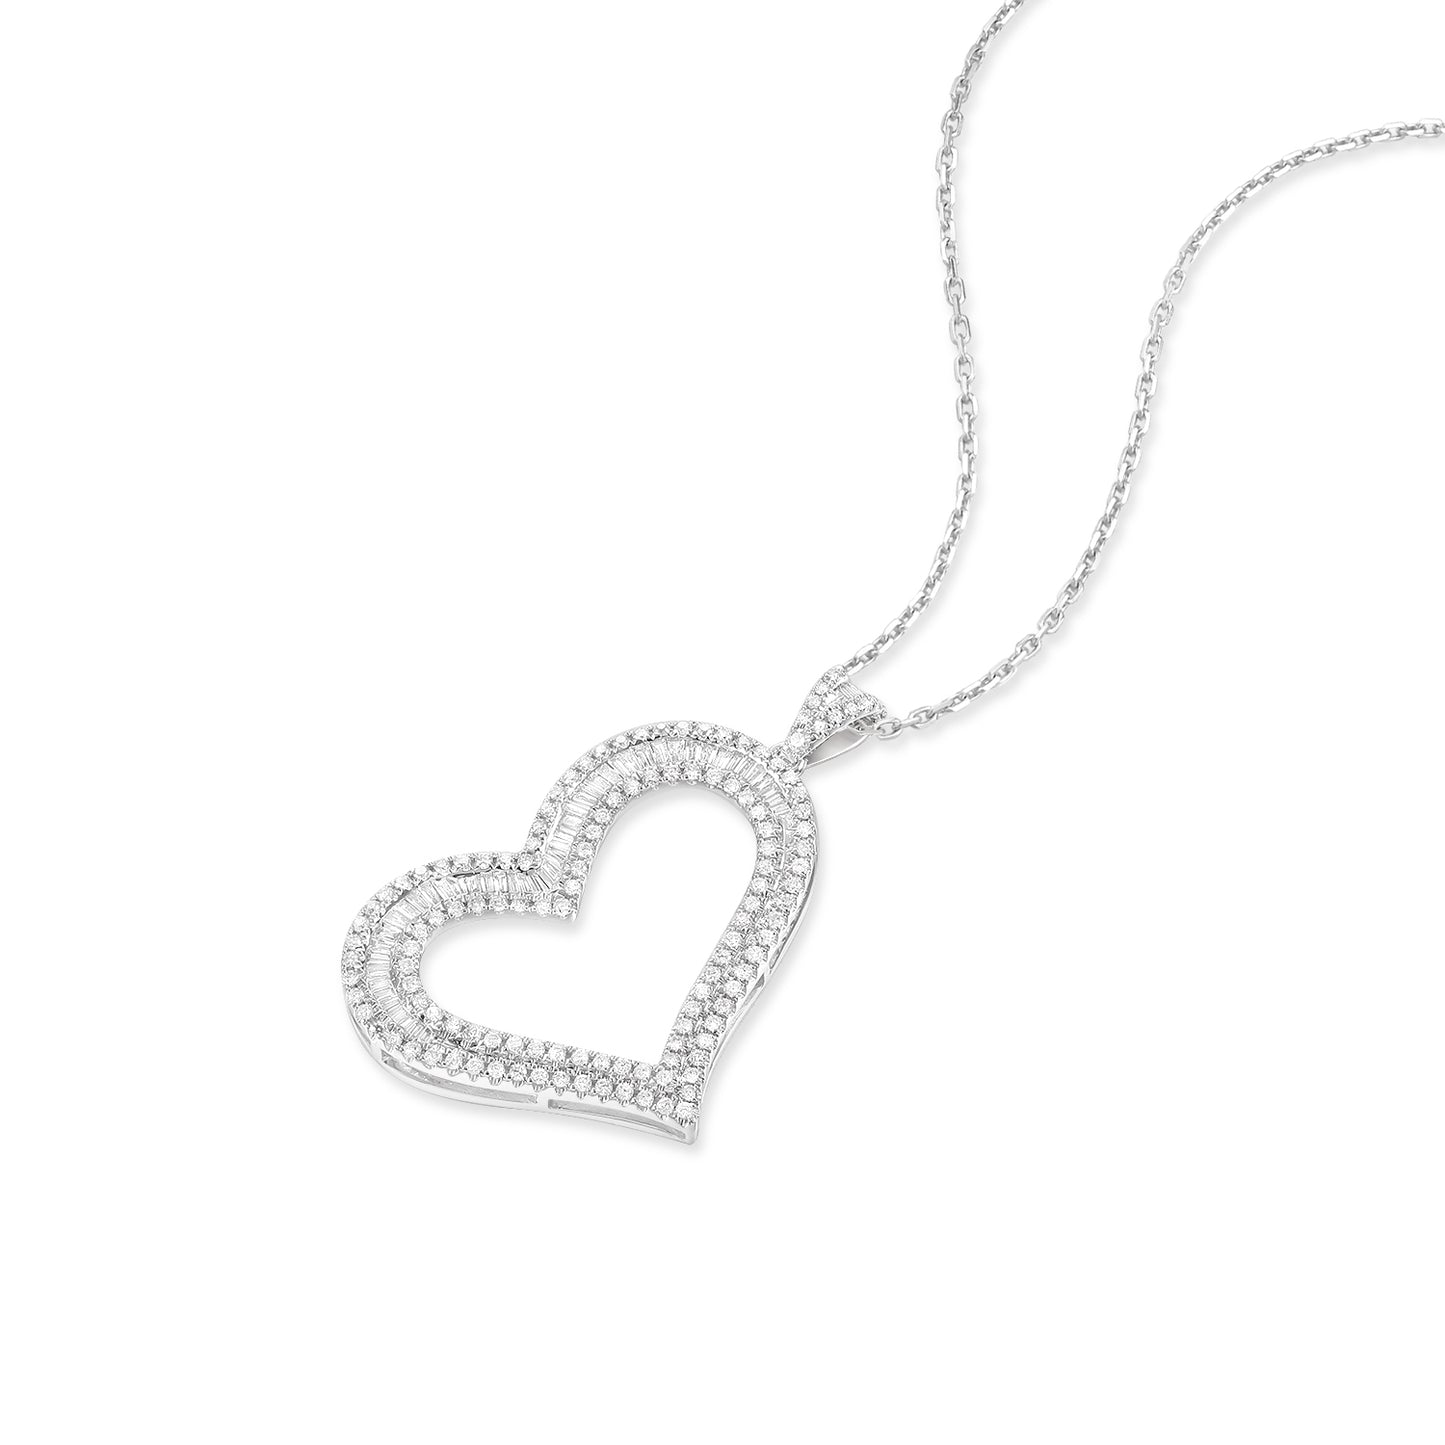 Diamond engagement necklace | Up 20% OFF